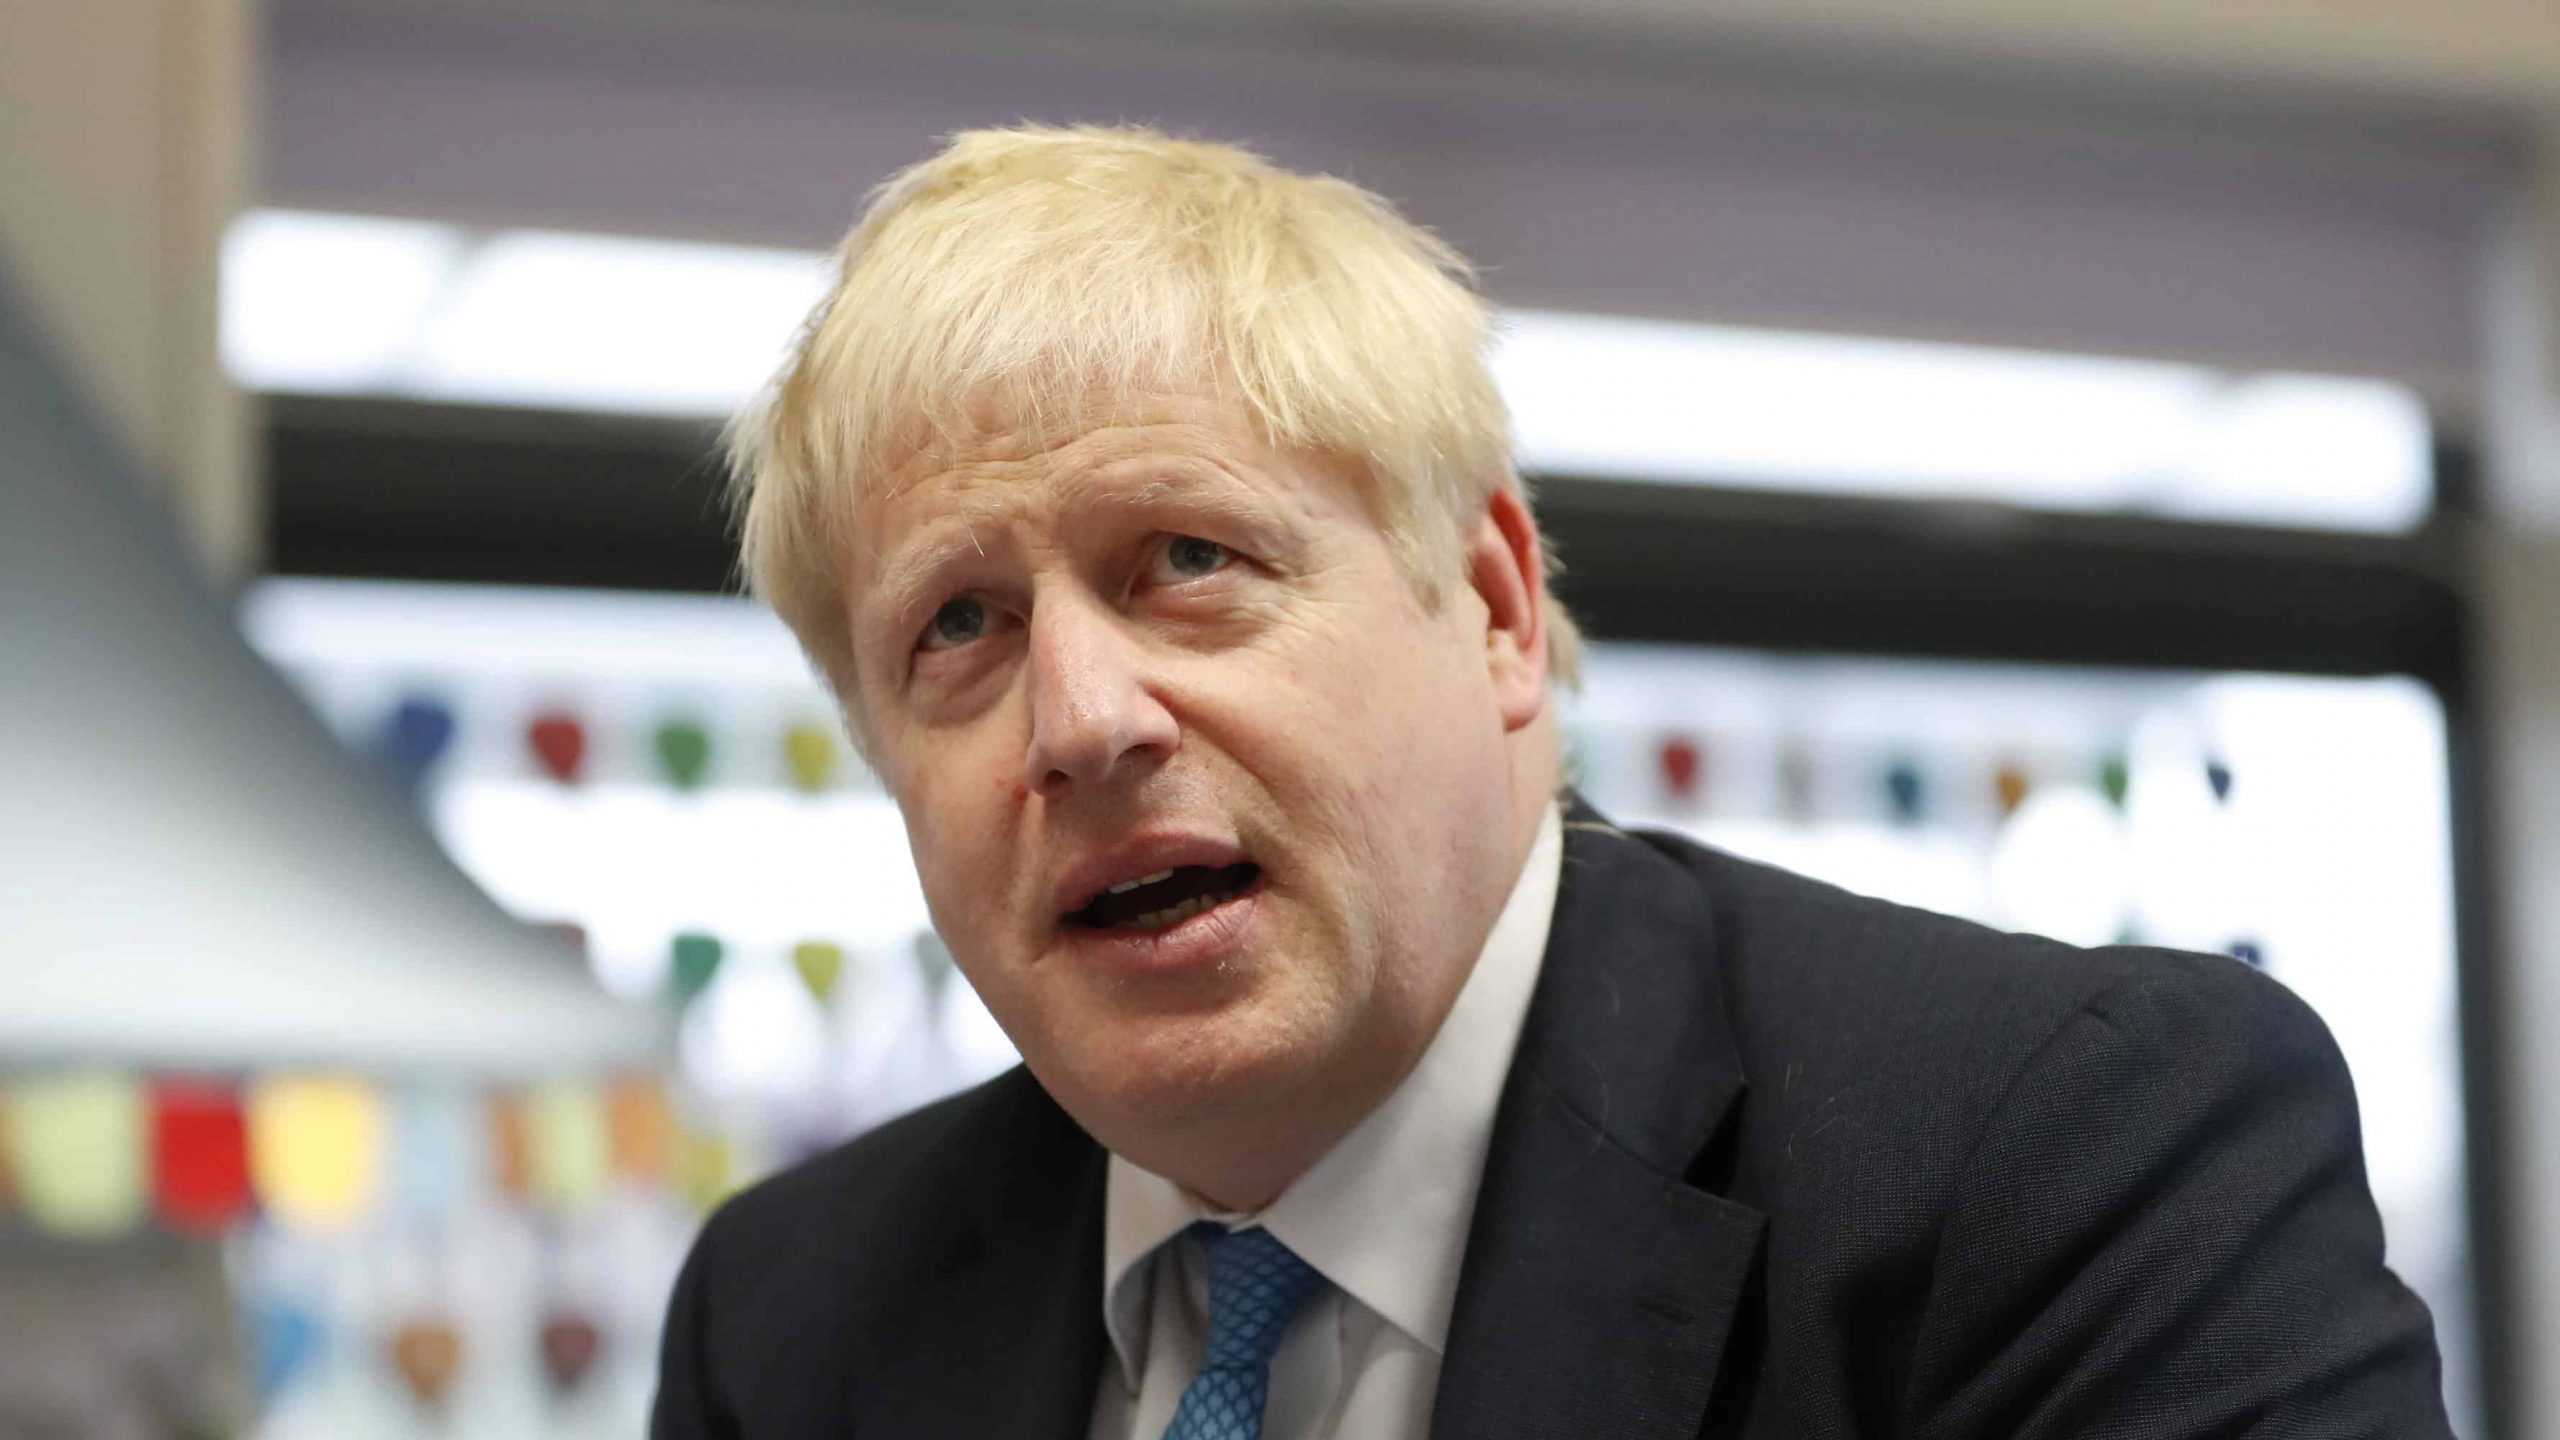 Boris Johnson hails end of ‘years of argument’ as he signs Withdrawal Agreement